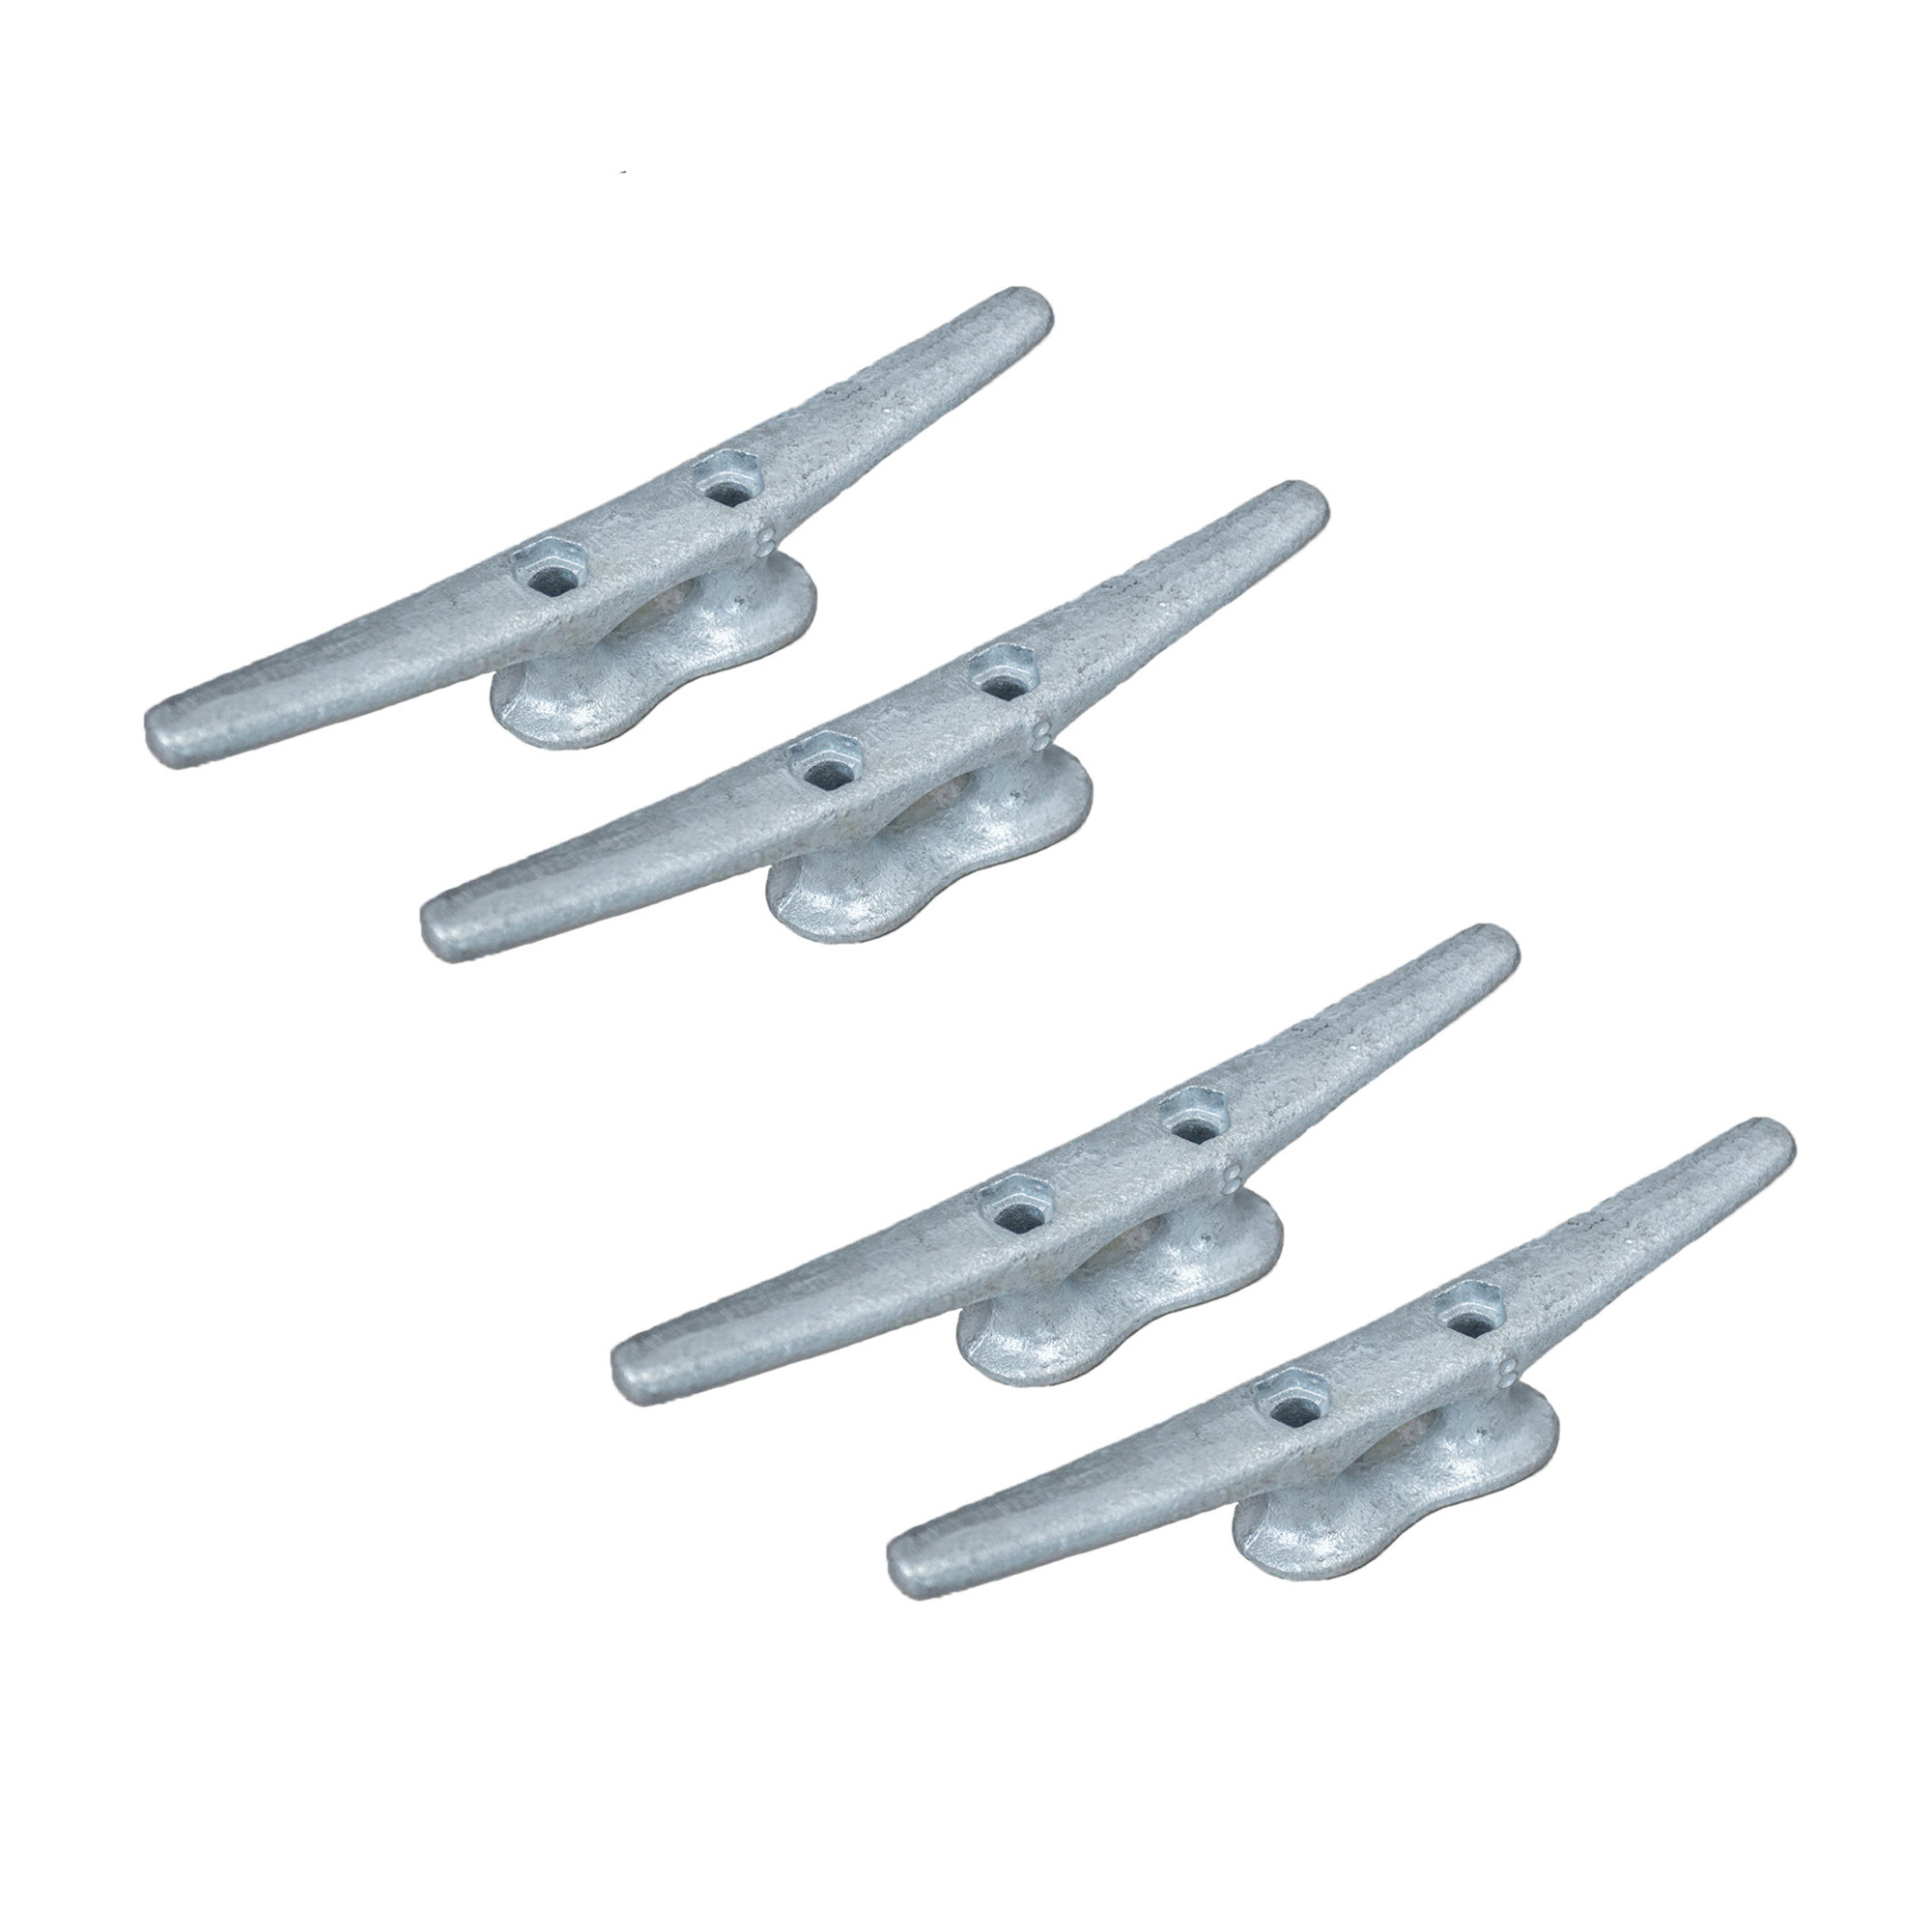 Tommy Docks, 8Inch Dock Cleat 4-Pack, Product Type Hardware, Length 8 in, Width 2 in, Model TD-20250-4